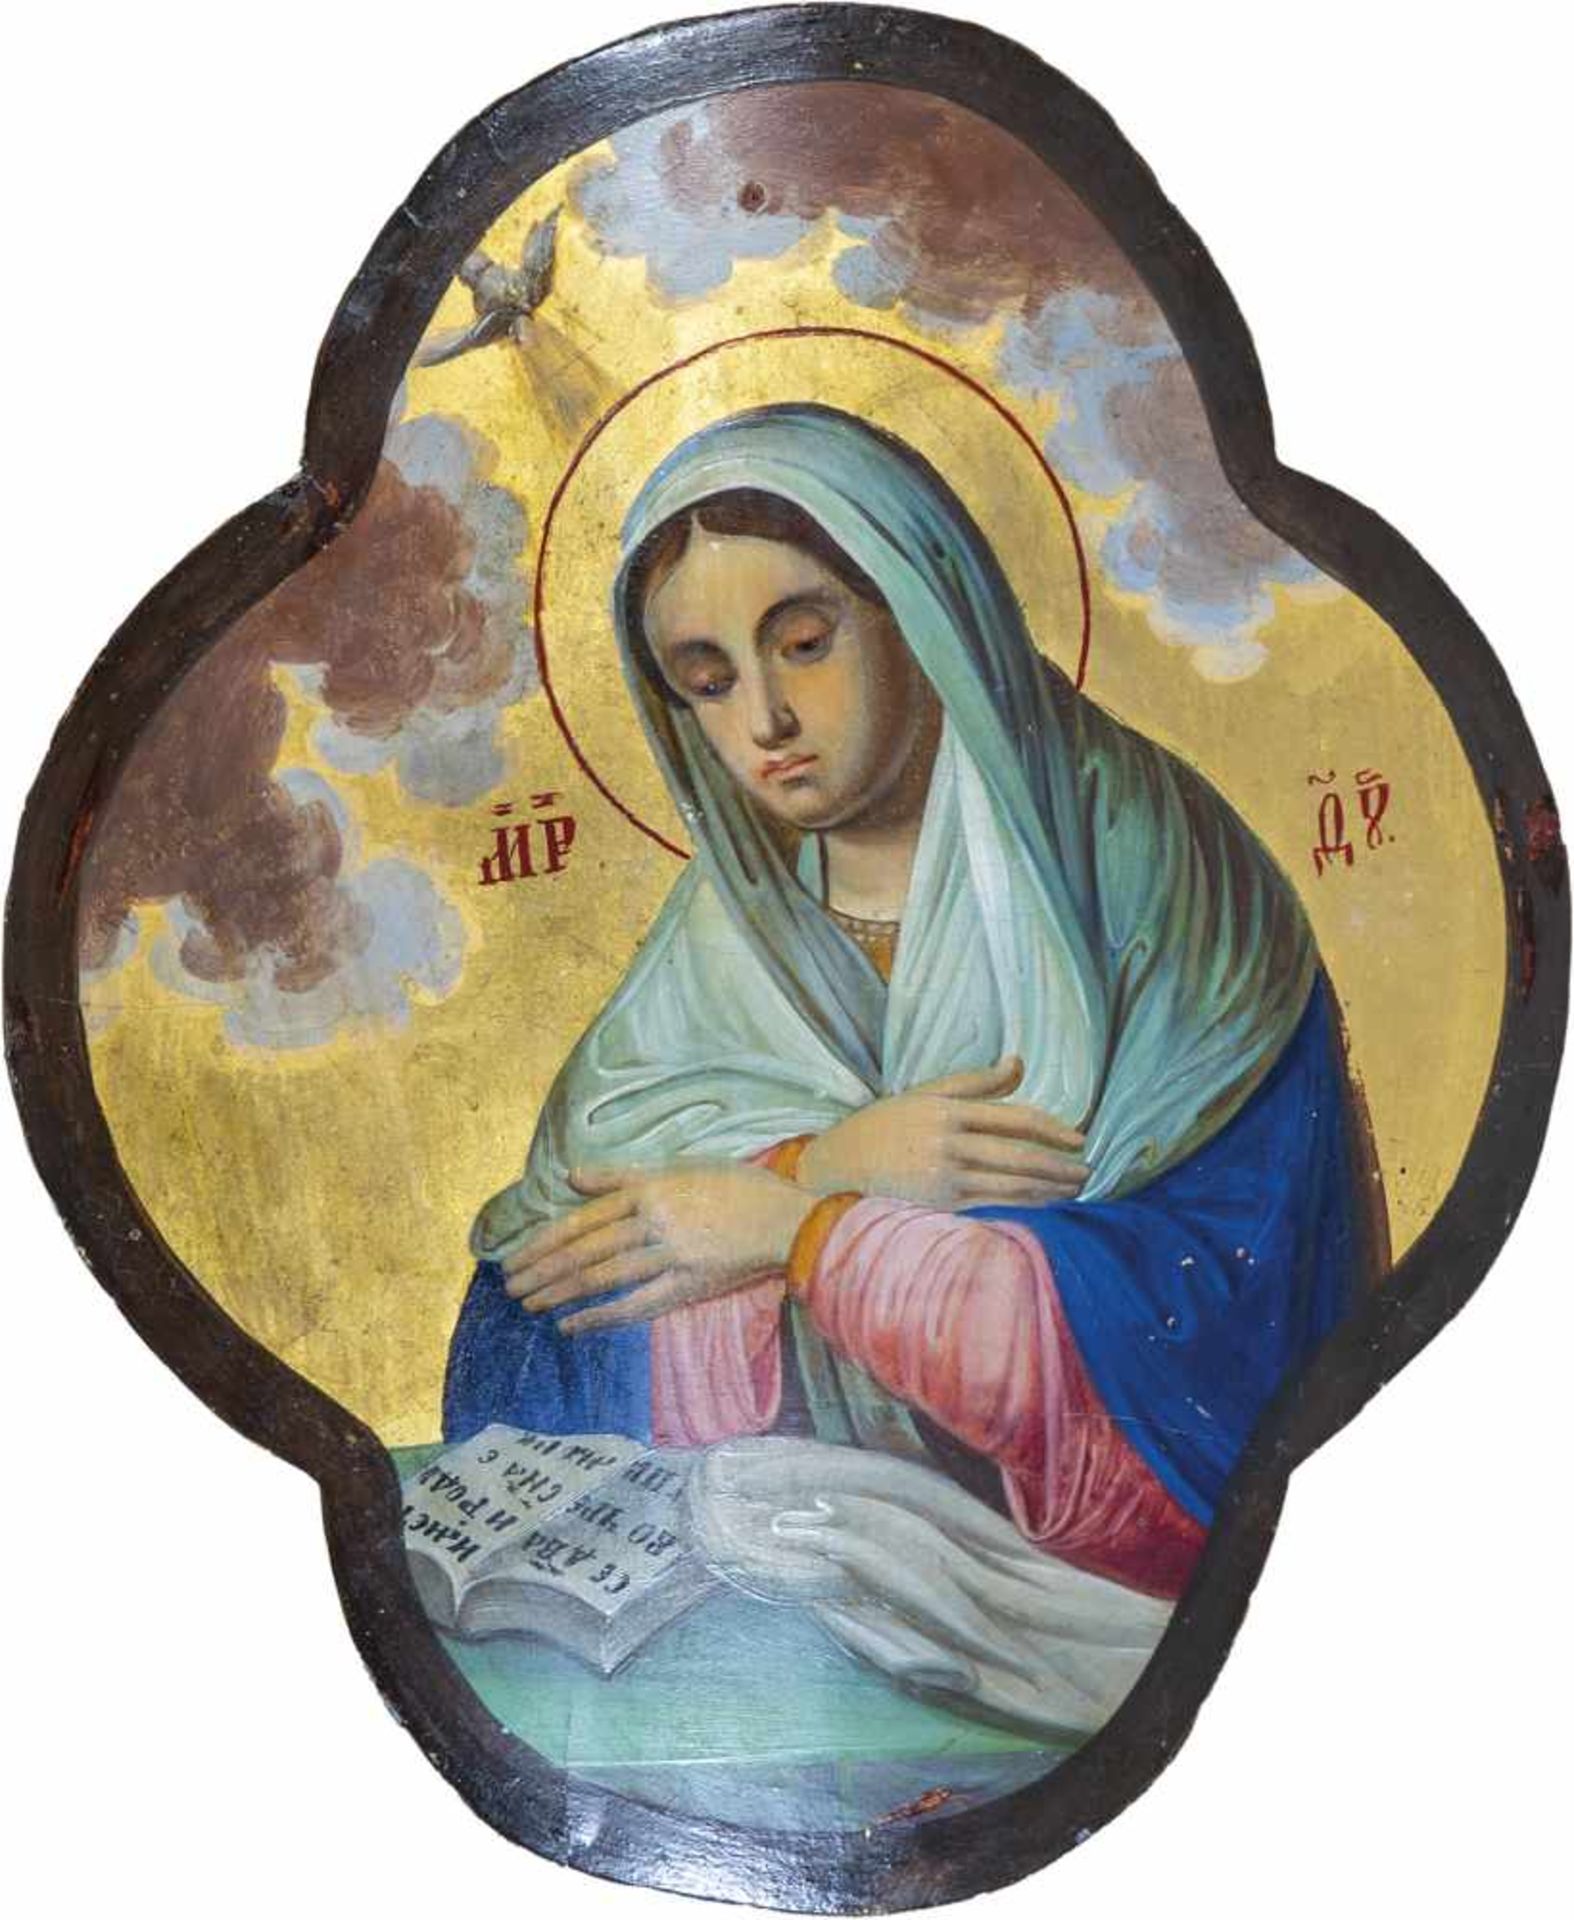 The Mother of God. Russia, 19th century. Tempera on gesso on wood panel with goldenbackground. Small